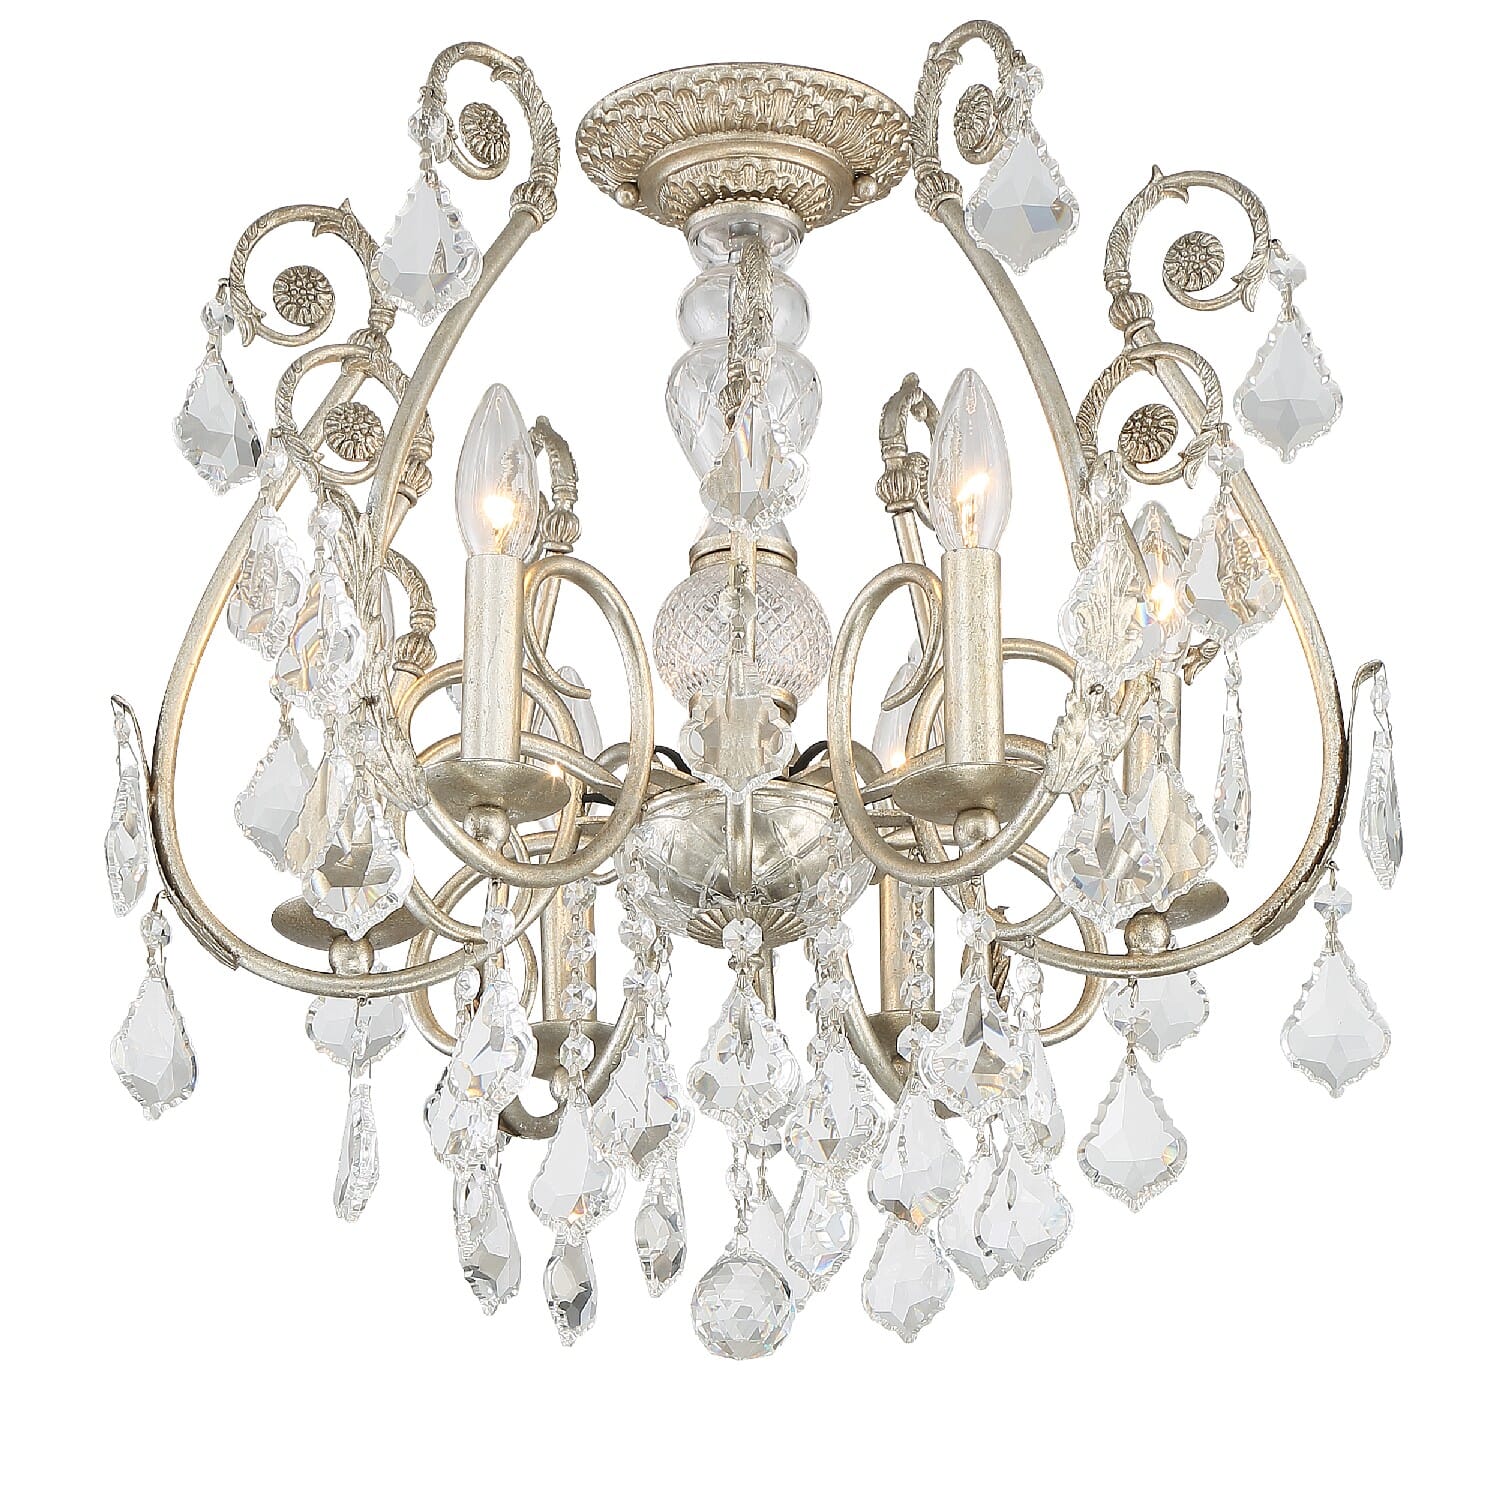 Regis 6-Light Ceiling Light in Olde Silver with Clear Hand Cut Crystals -  Crystorama, 5115-OS-CL-MWP_CEILING